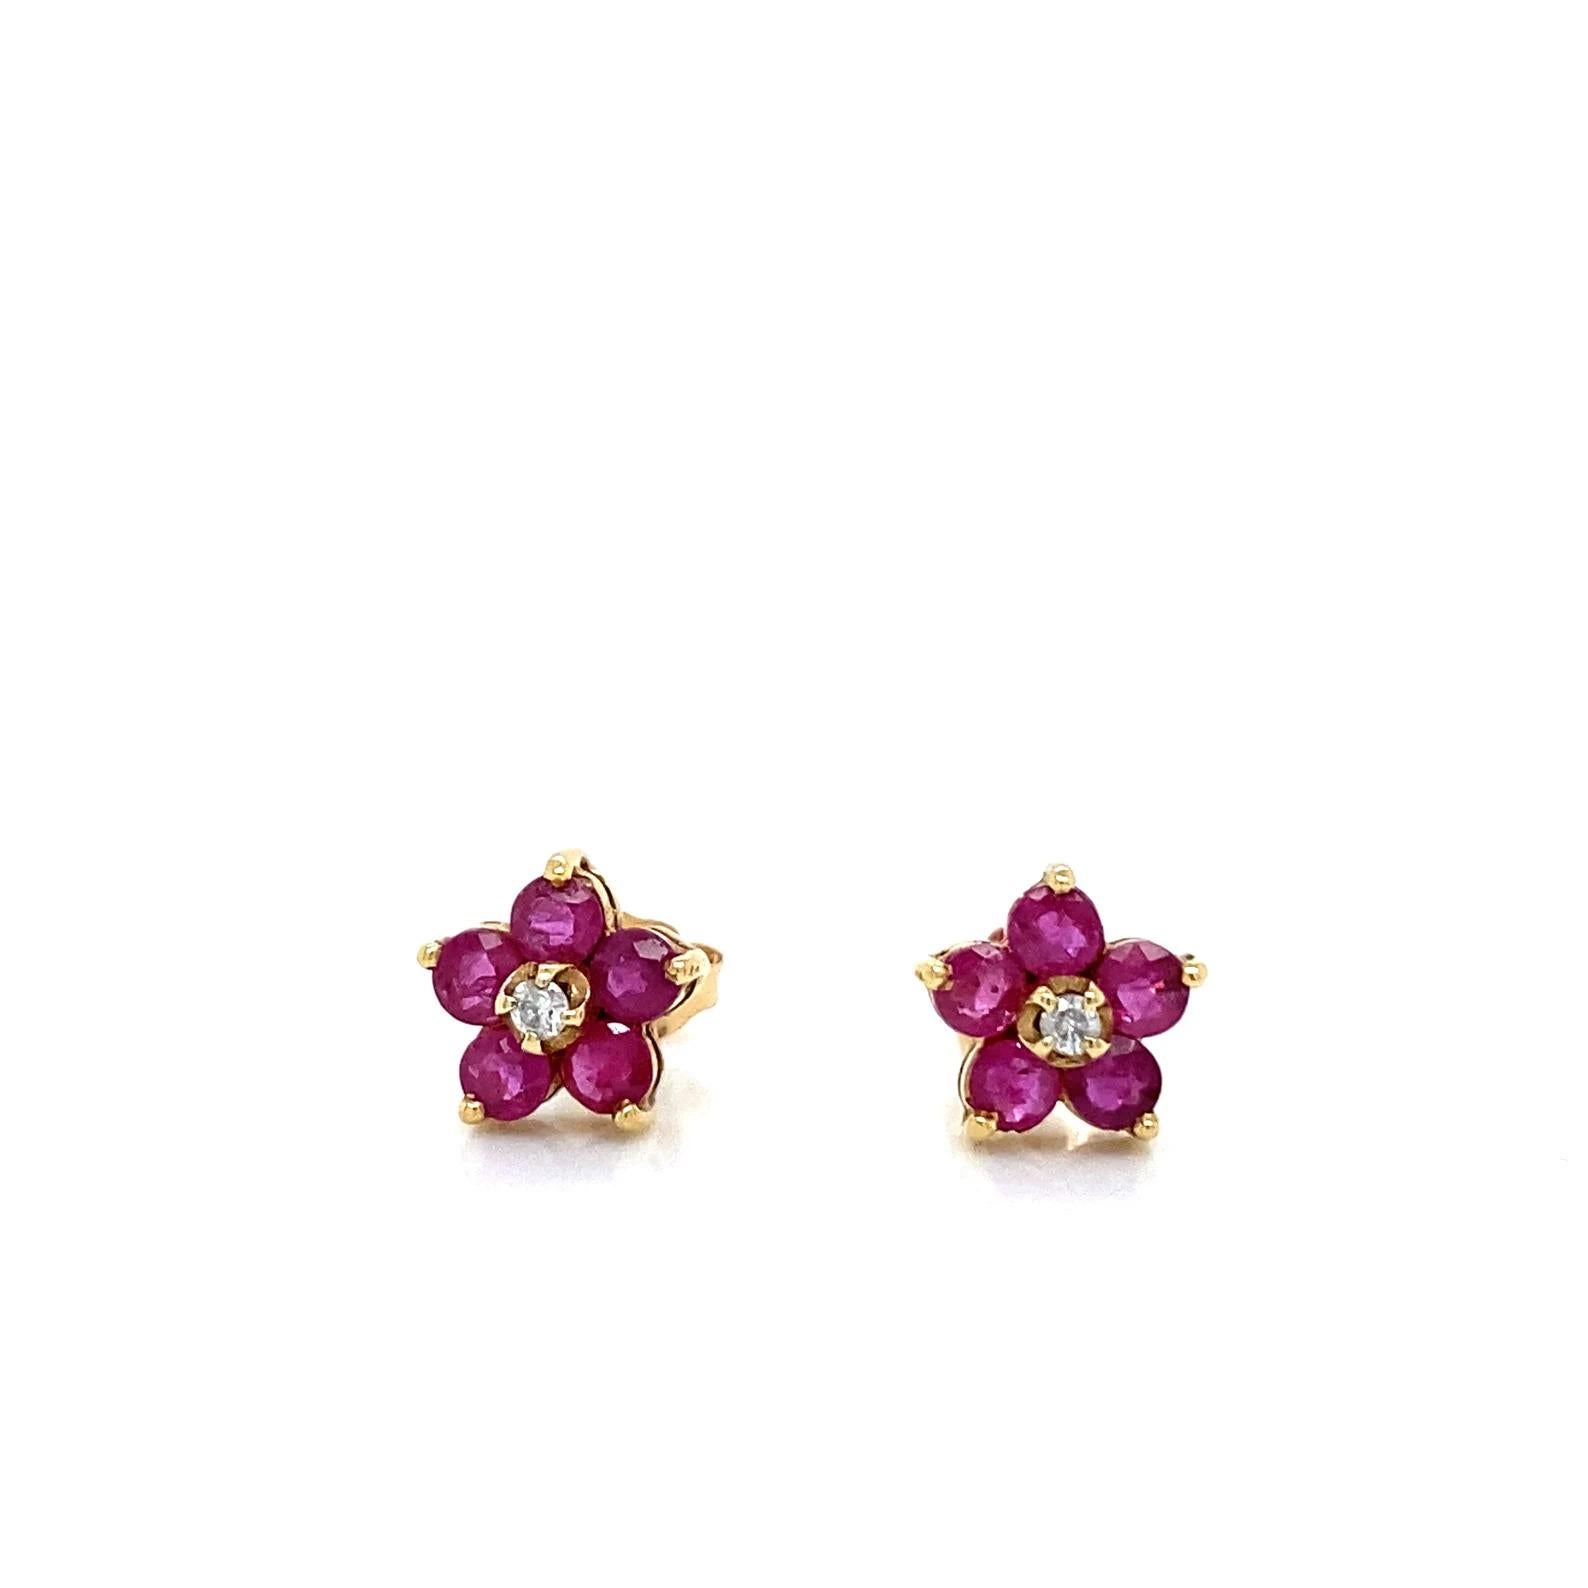 0.84 Total Carat Ruby and Diamond Flower Shaped Push Back Earrings in 14K Gold

These classic earrings feature 0.80 carats of Ruby and .04 carats of Diamond set in 14K Yellow Gold. These beautiful earrings were proudly made in New York City. 
Orders